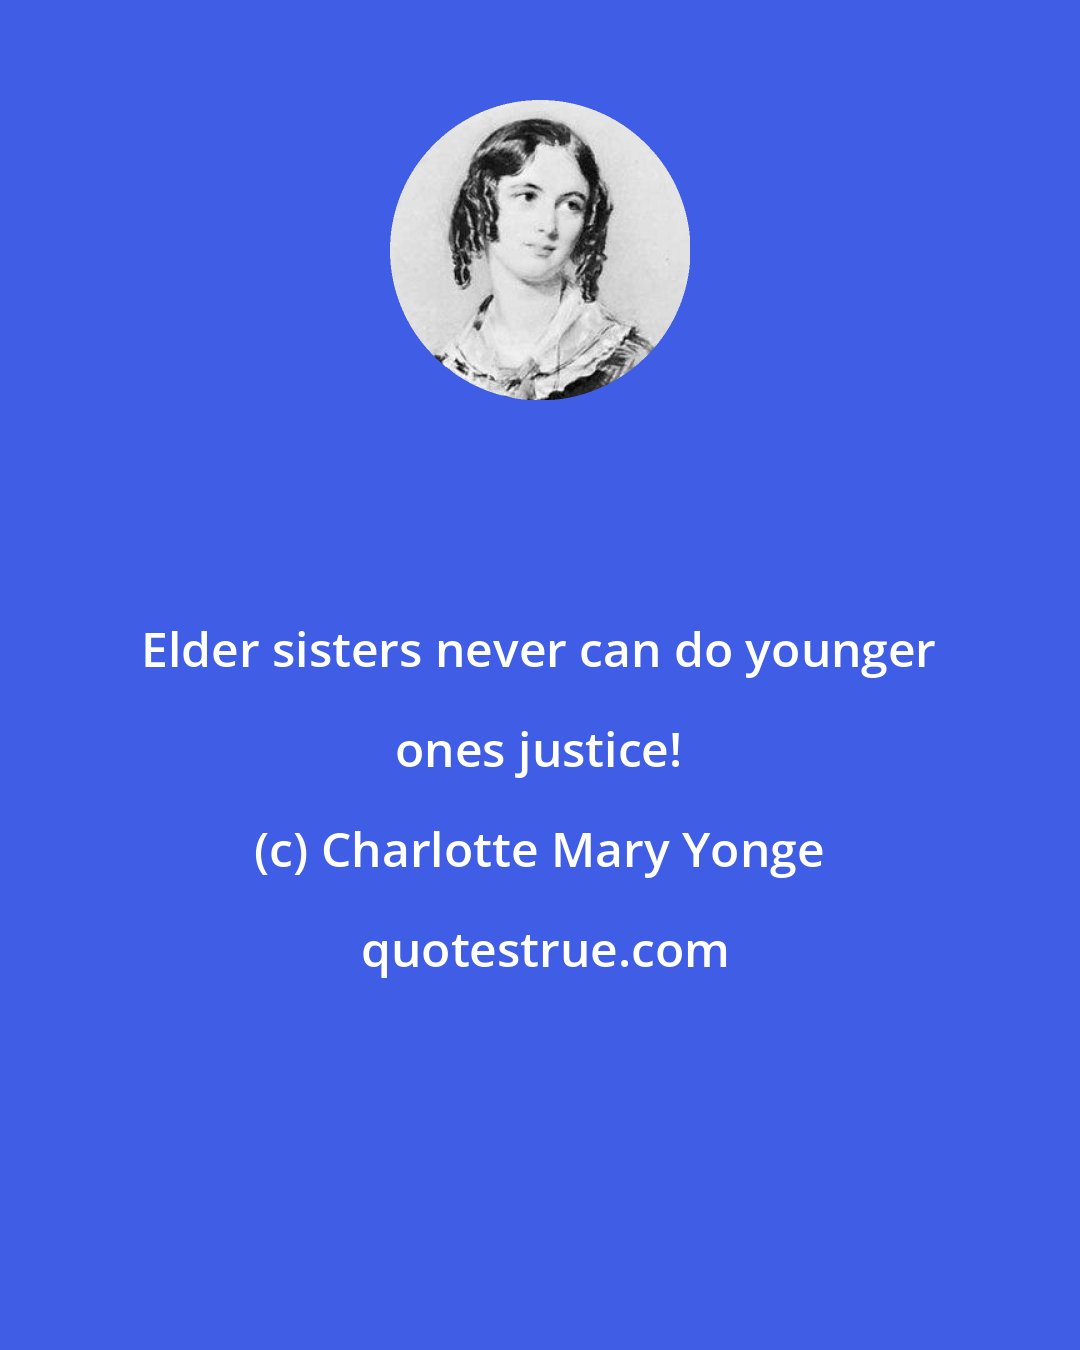 Charlotte Mary Yonge: Elder sisters never can do younger ones justice!